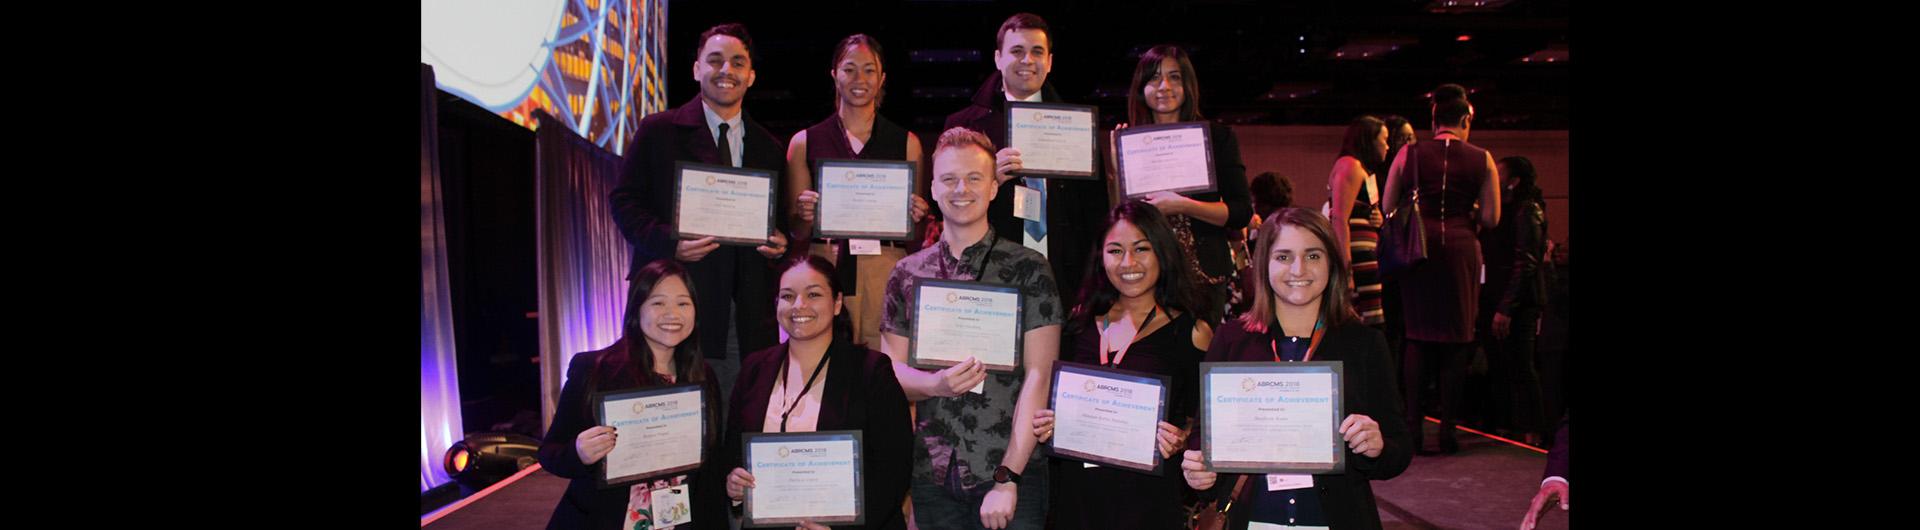 CSULB students holding up ABRCMS 2018 awards